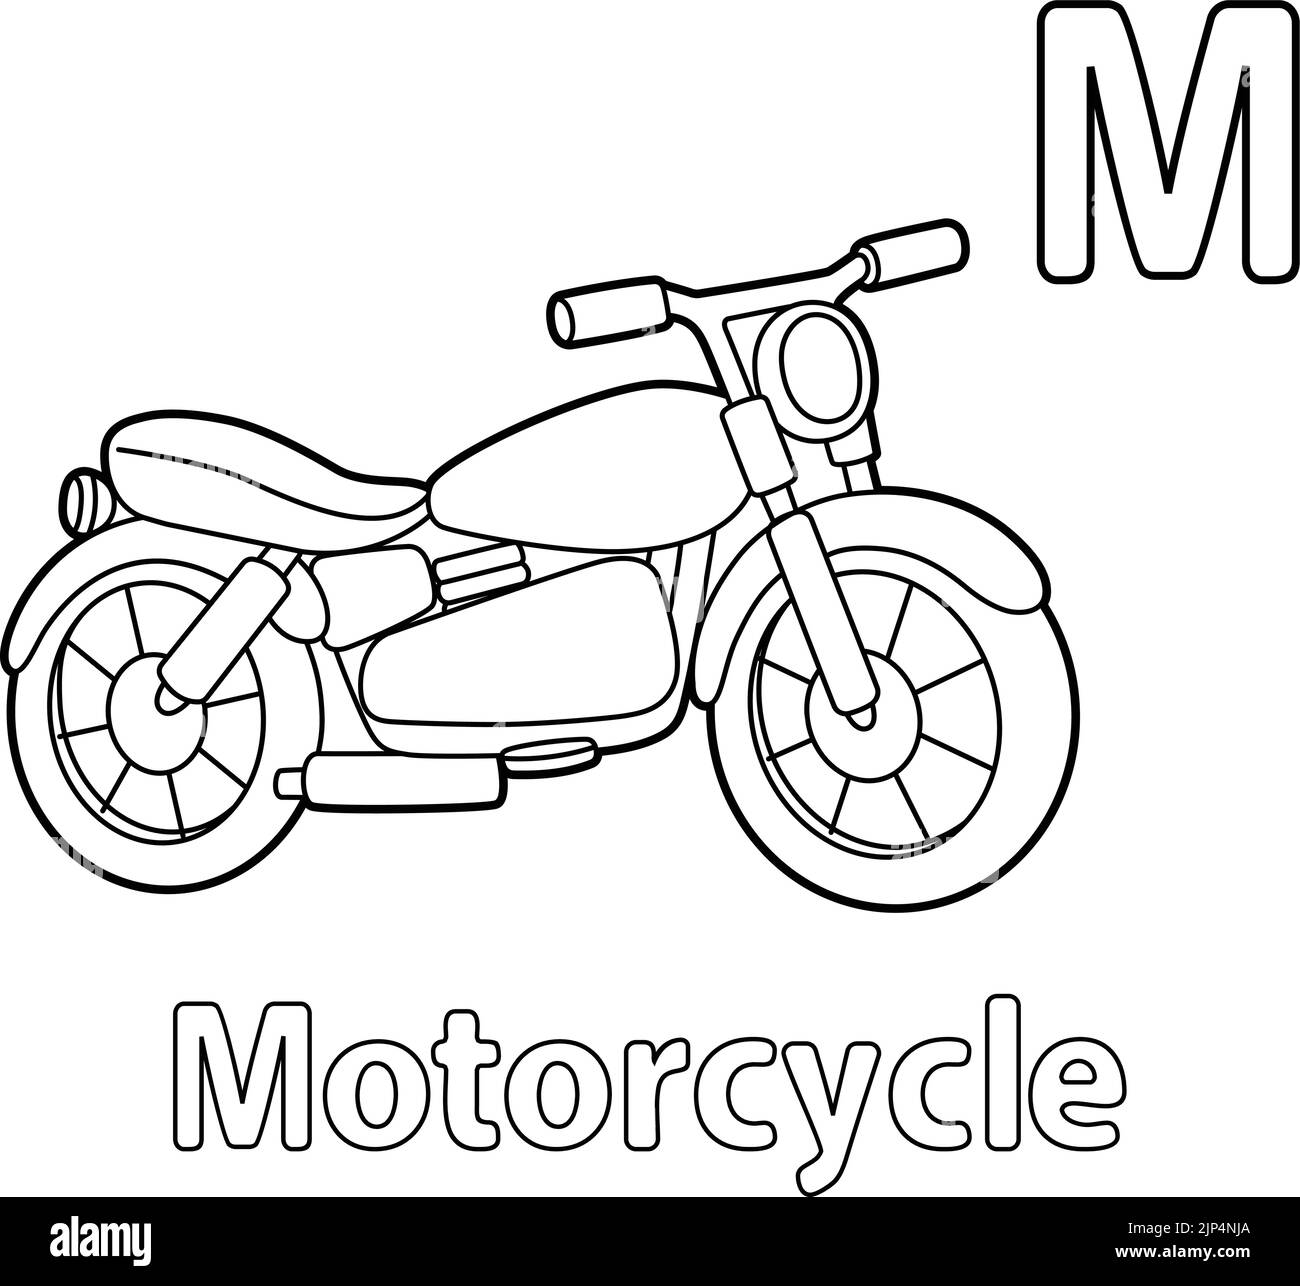 Motorcycle Alphabet ABC Coloring Page M Stock Vector